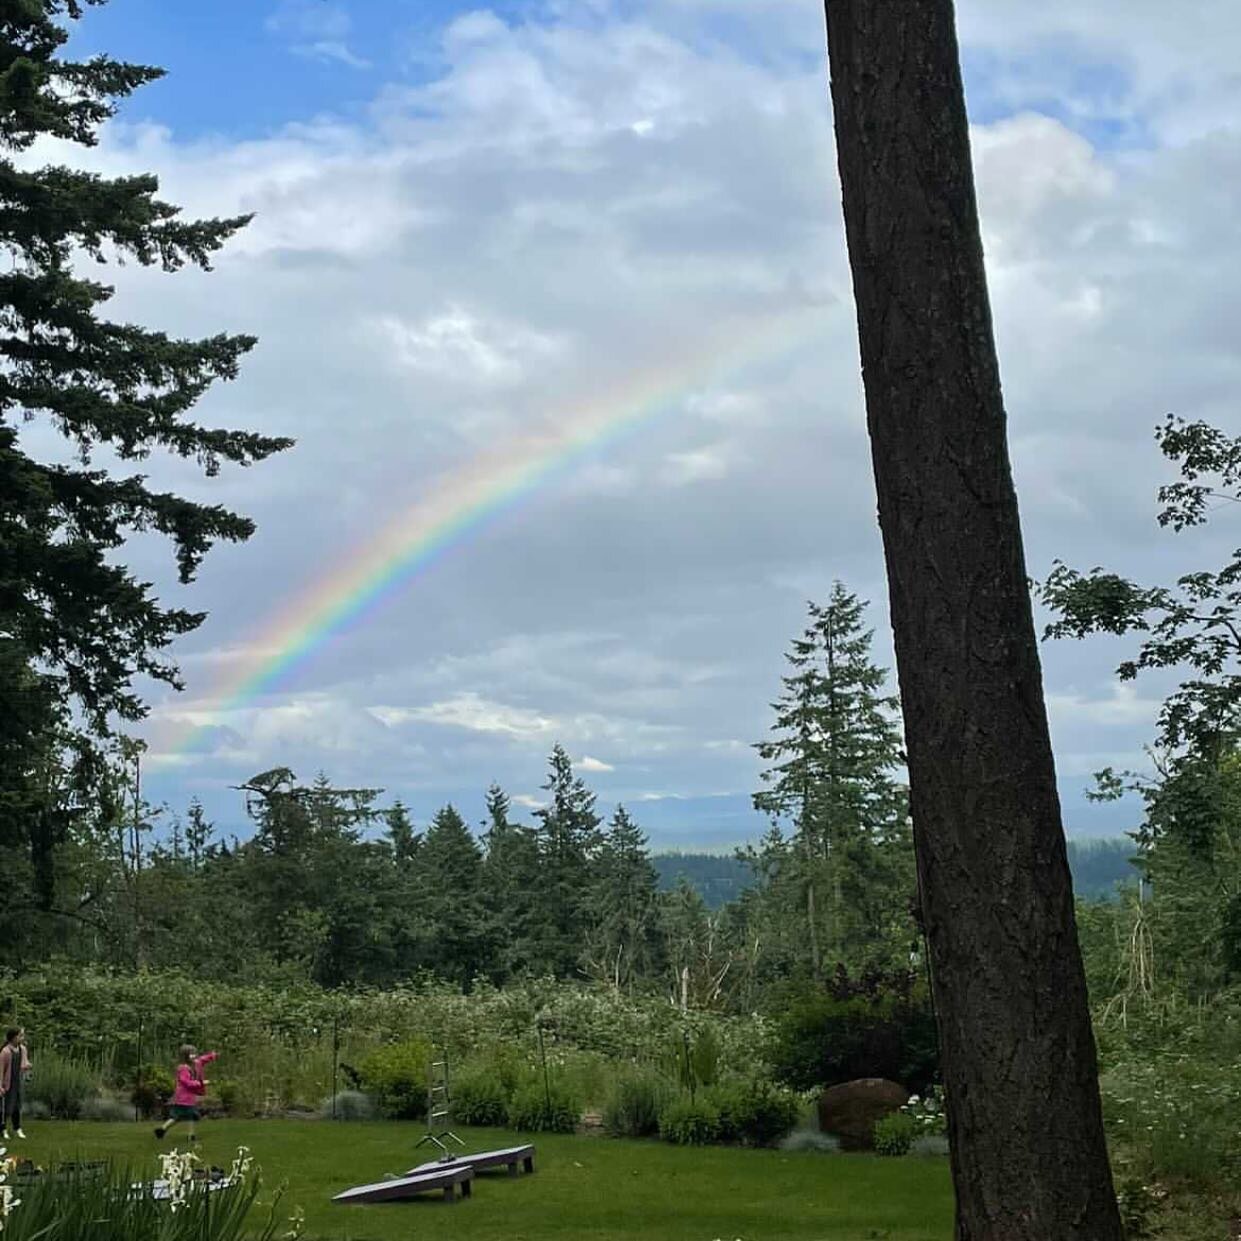 You don&rsquo;t need clear skies to get a good view at the winery. @missmi123 caught this rainbow yesterday. We have space still this weekend if you&rsquo;d like to join us.